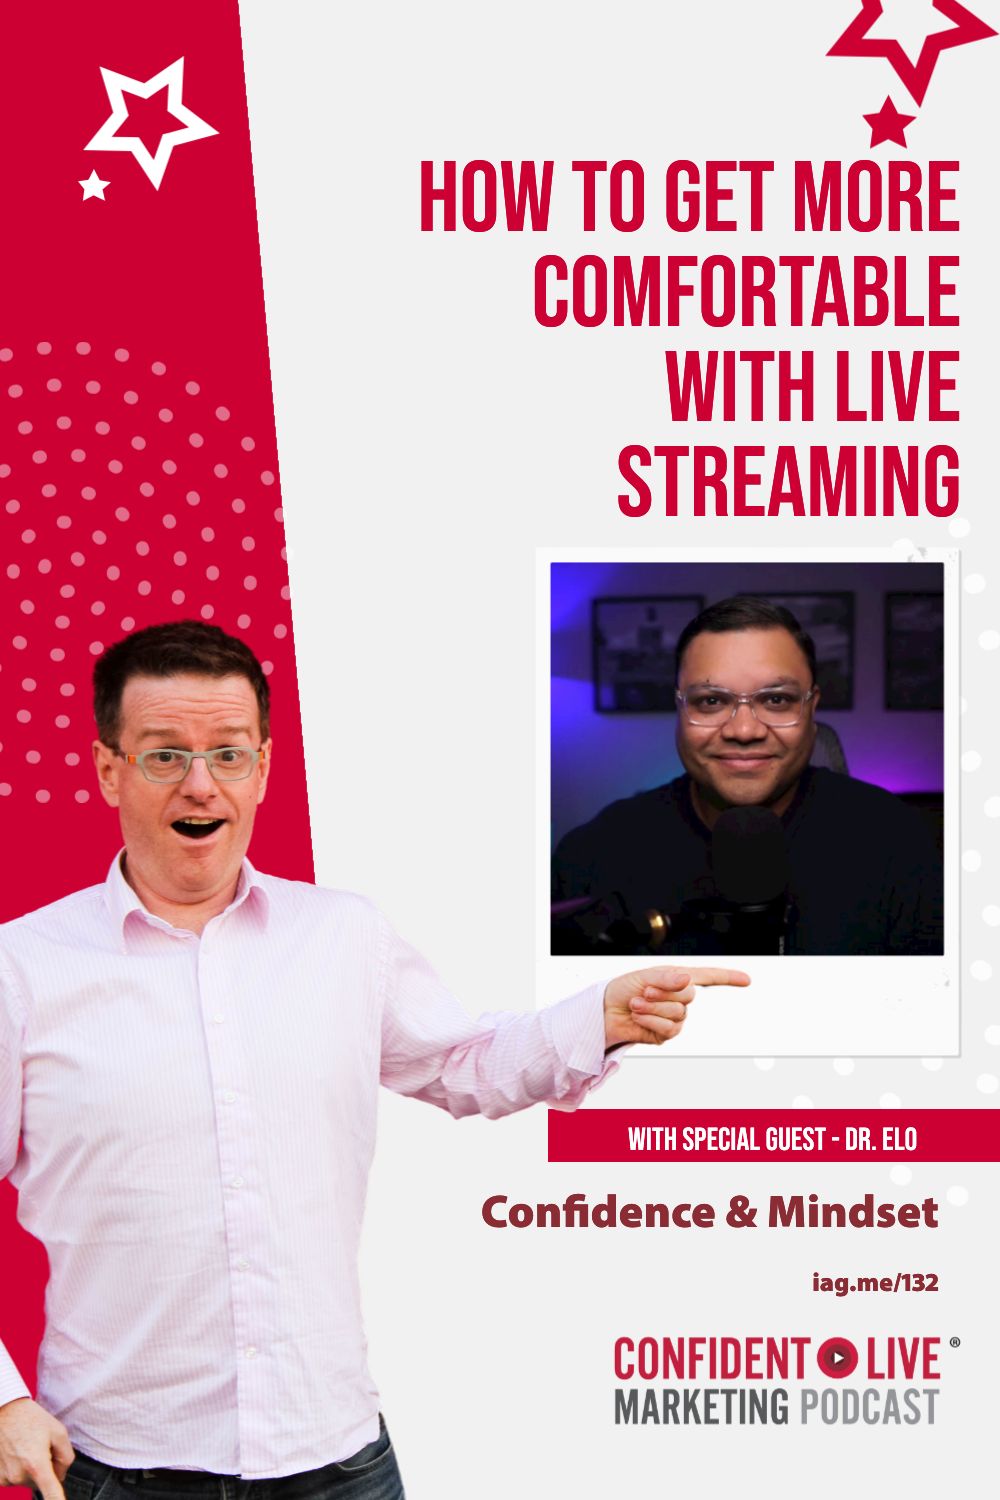 How to Get More Comfortable with Live Streaming